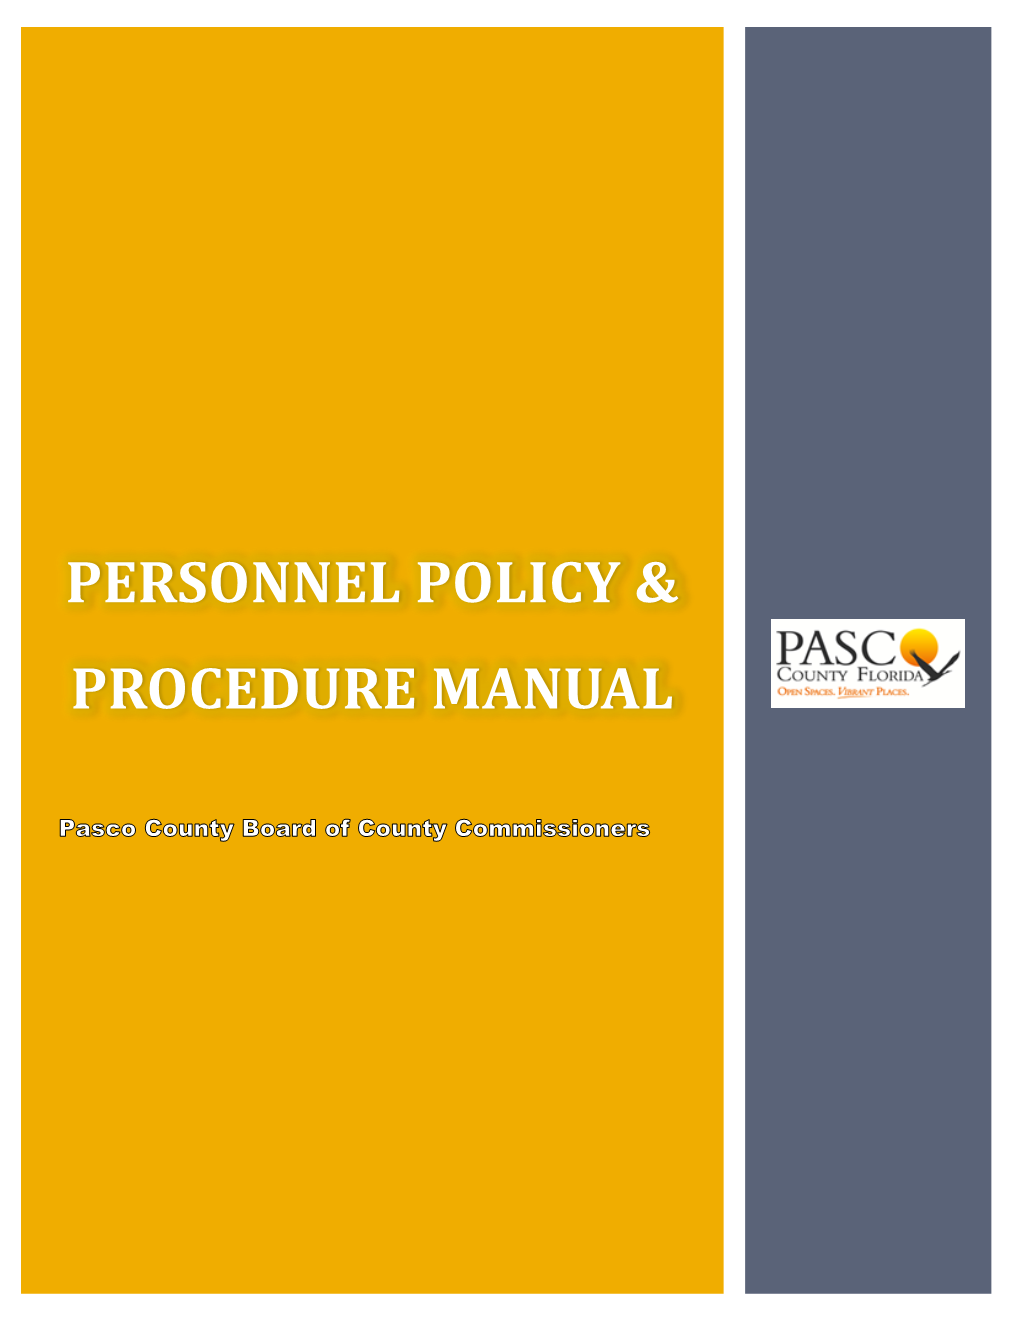 Personnel Policy & Procedure Manual